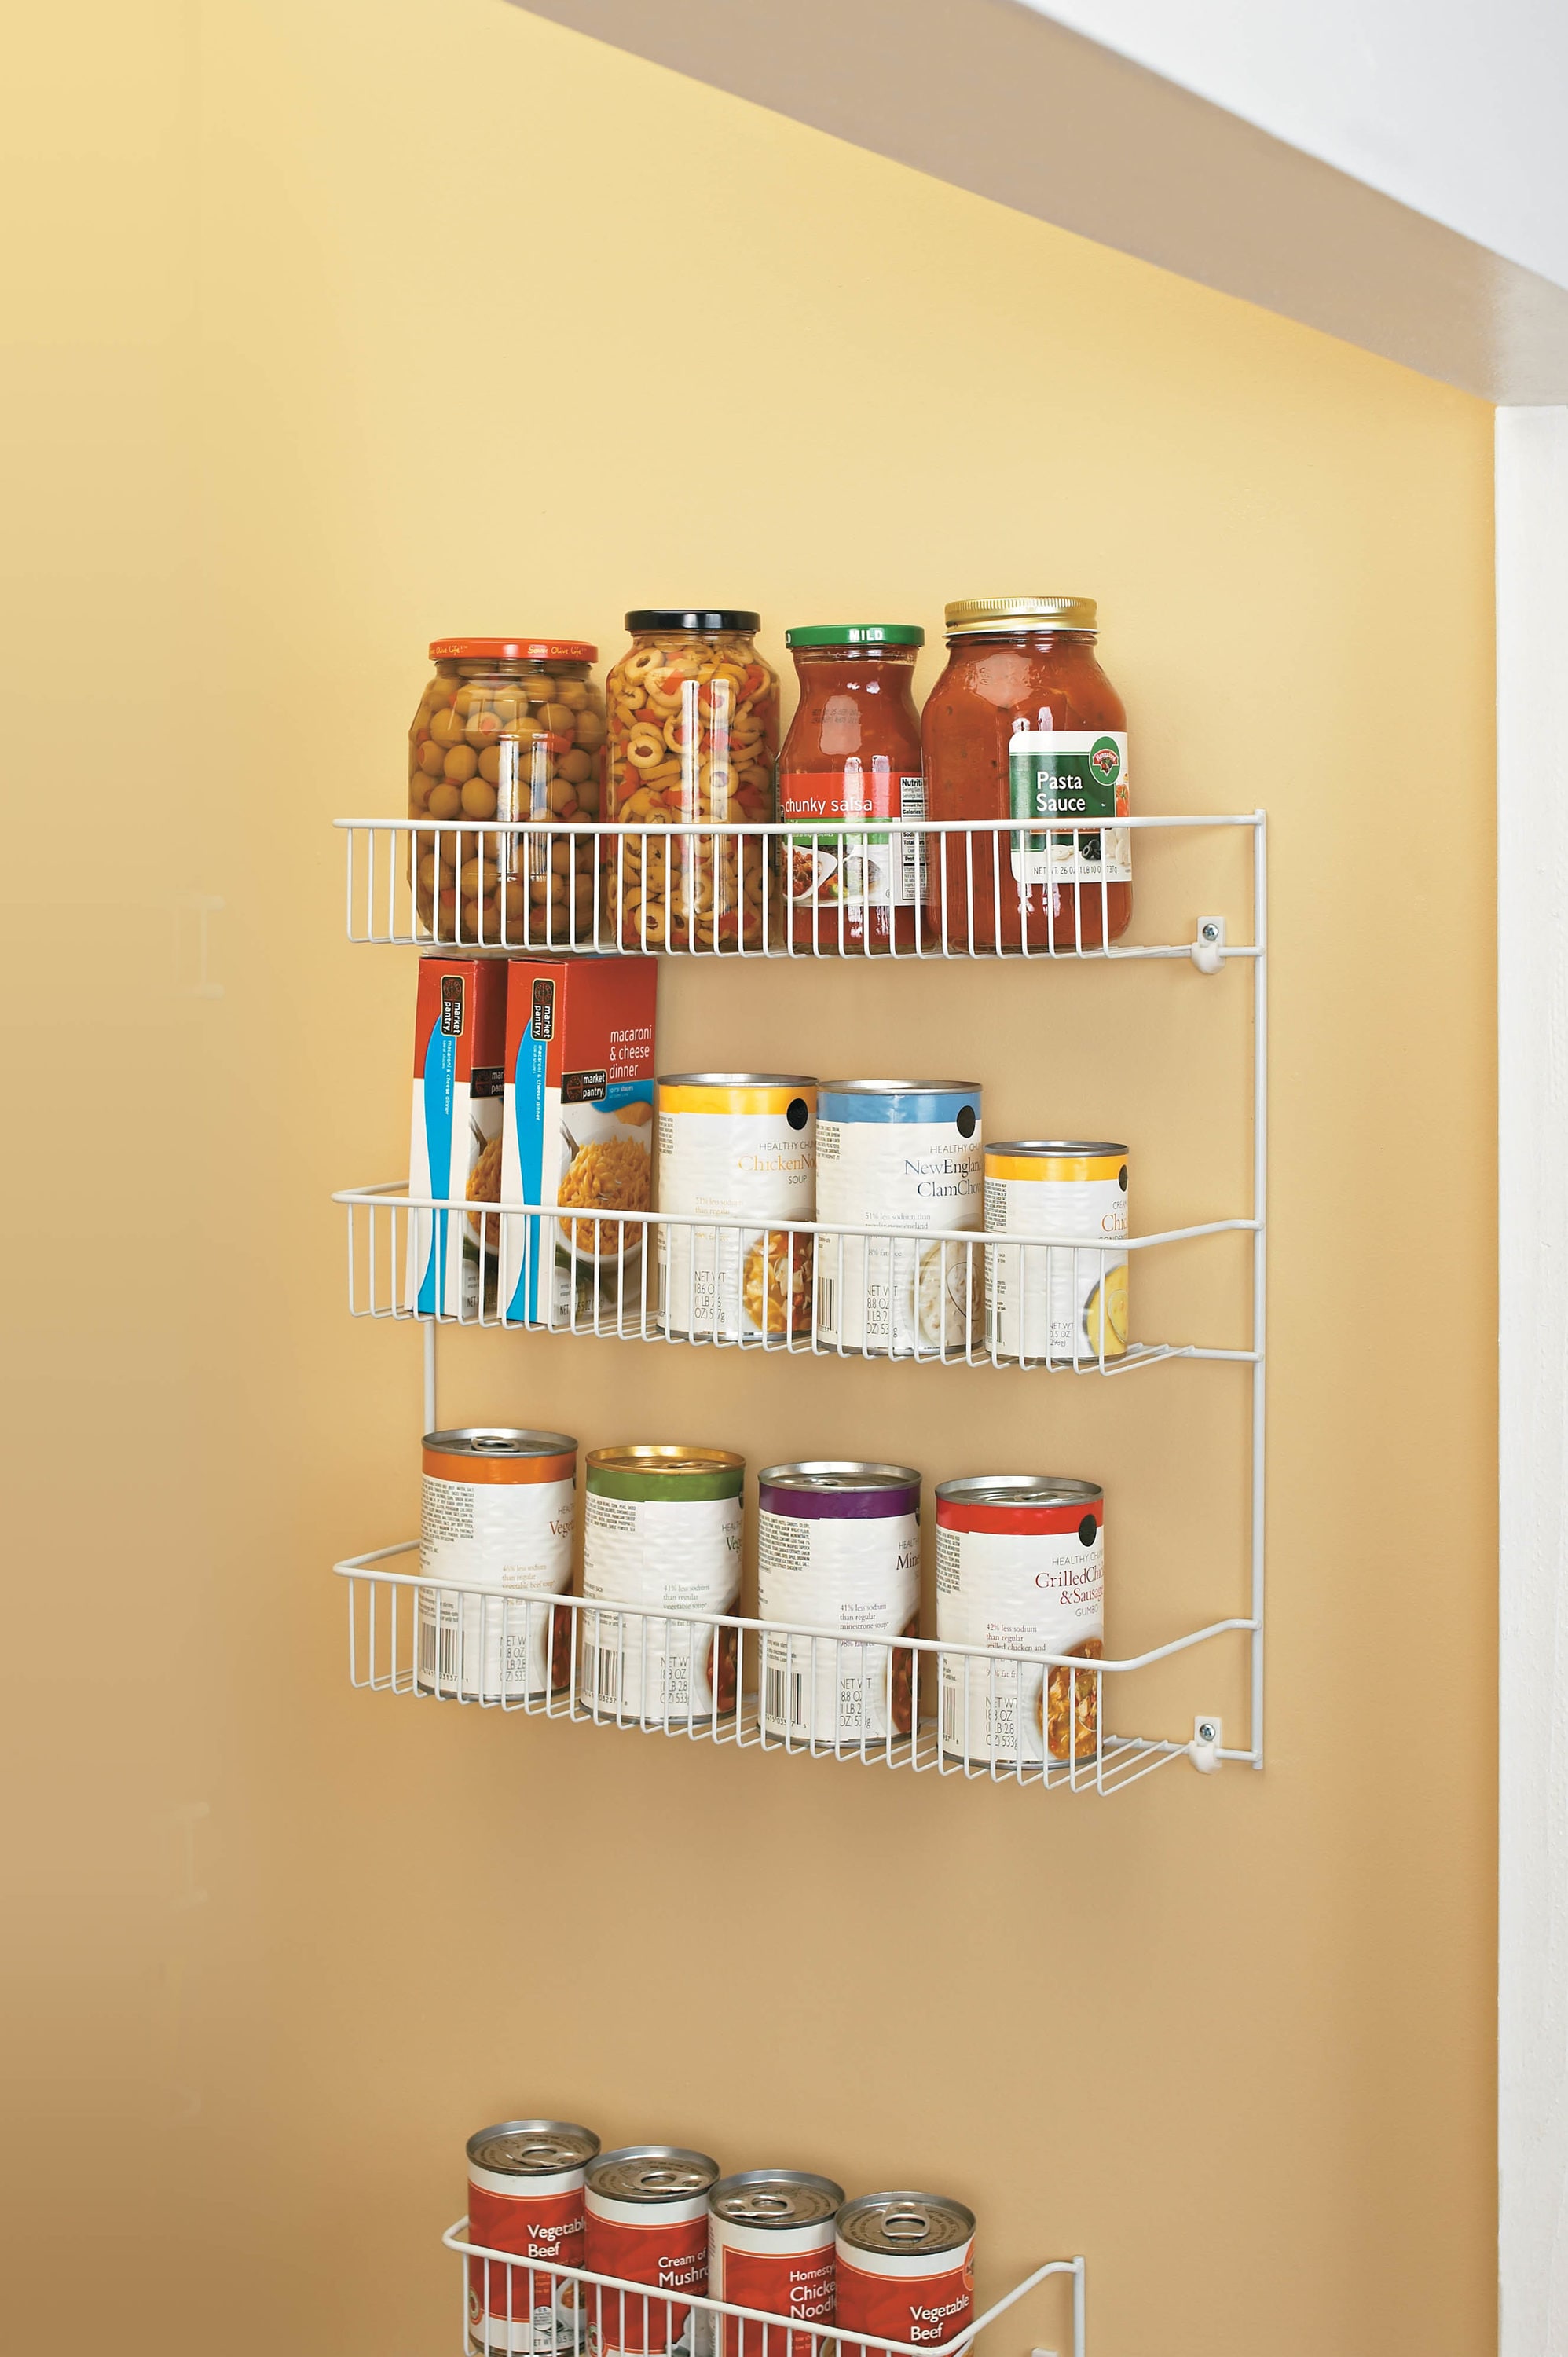 Reviews for ClosetMaid White Over the Door Spice Rack